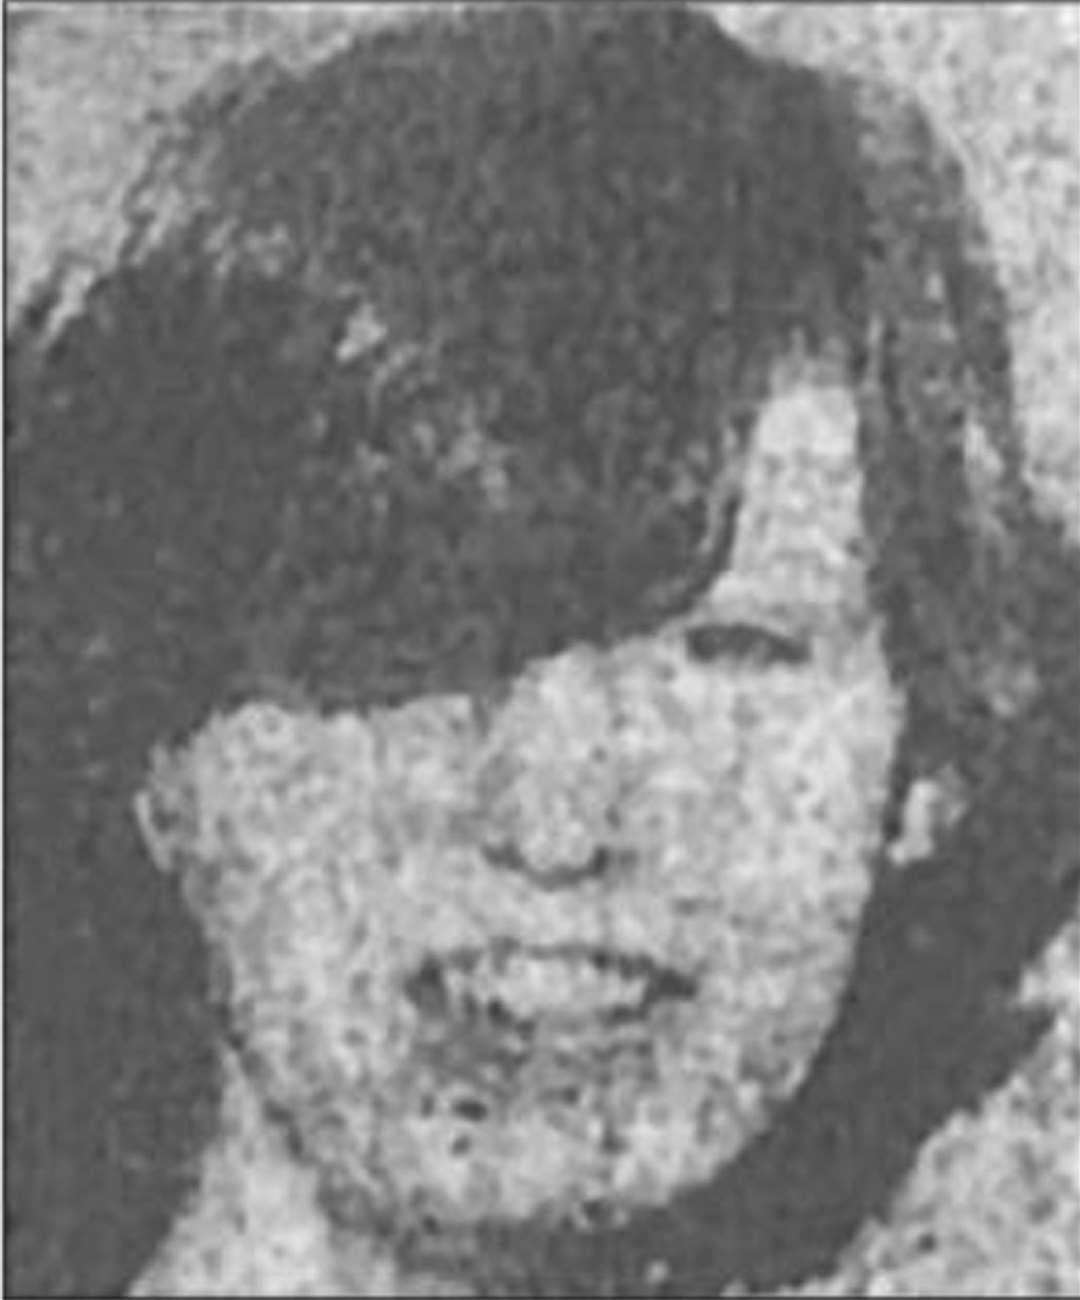 Jacqui Montgomery was killed in 1975 (Crown Prosecution Service/PA)